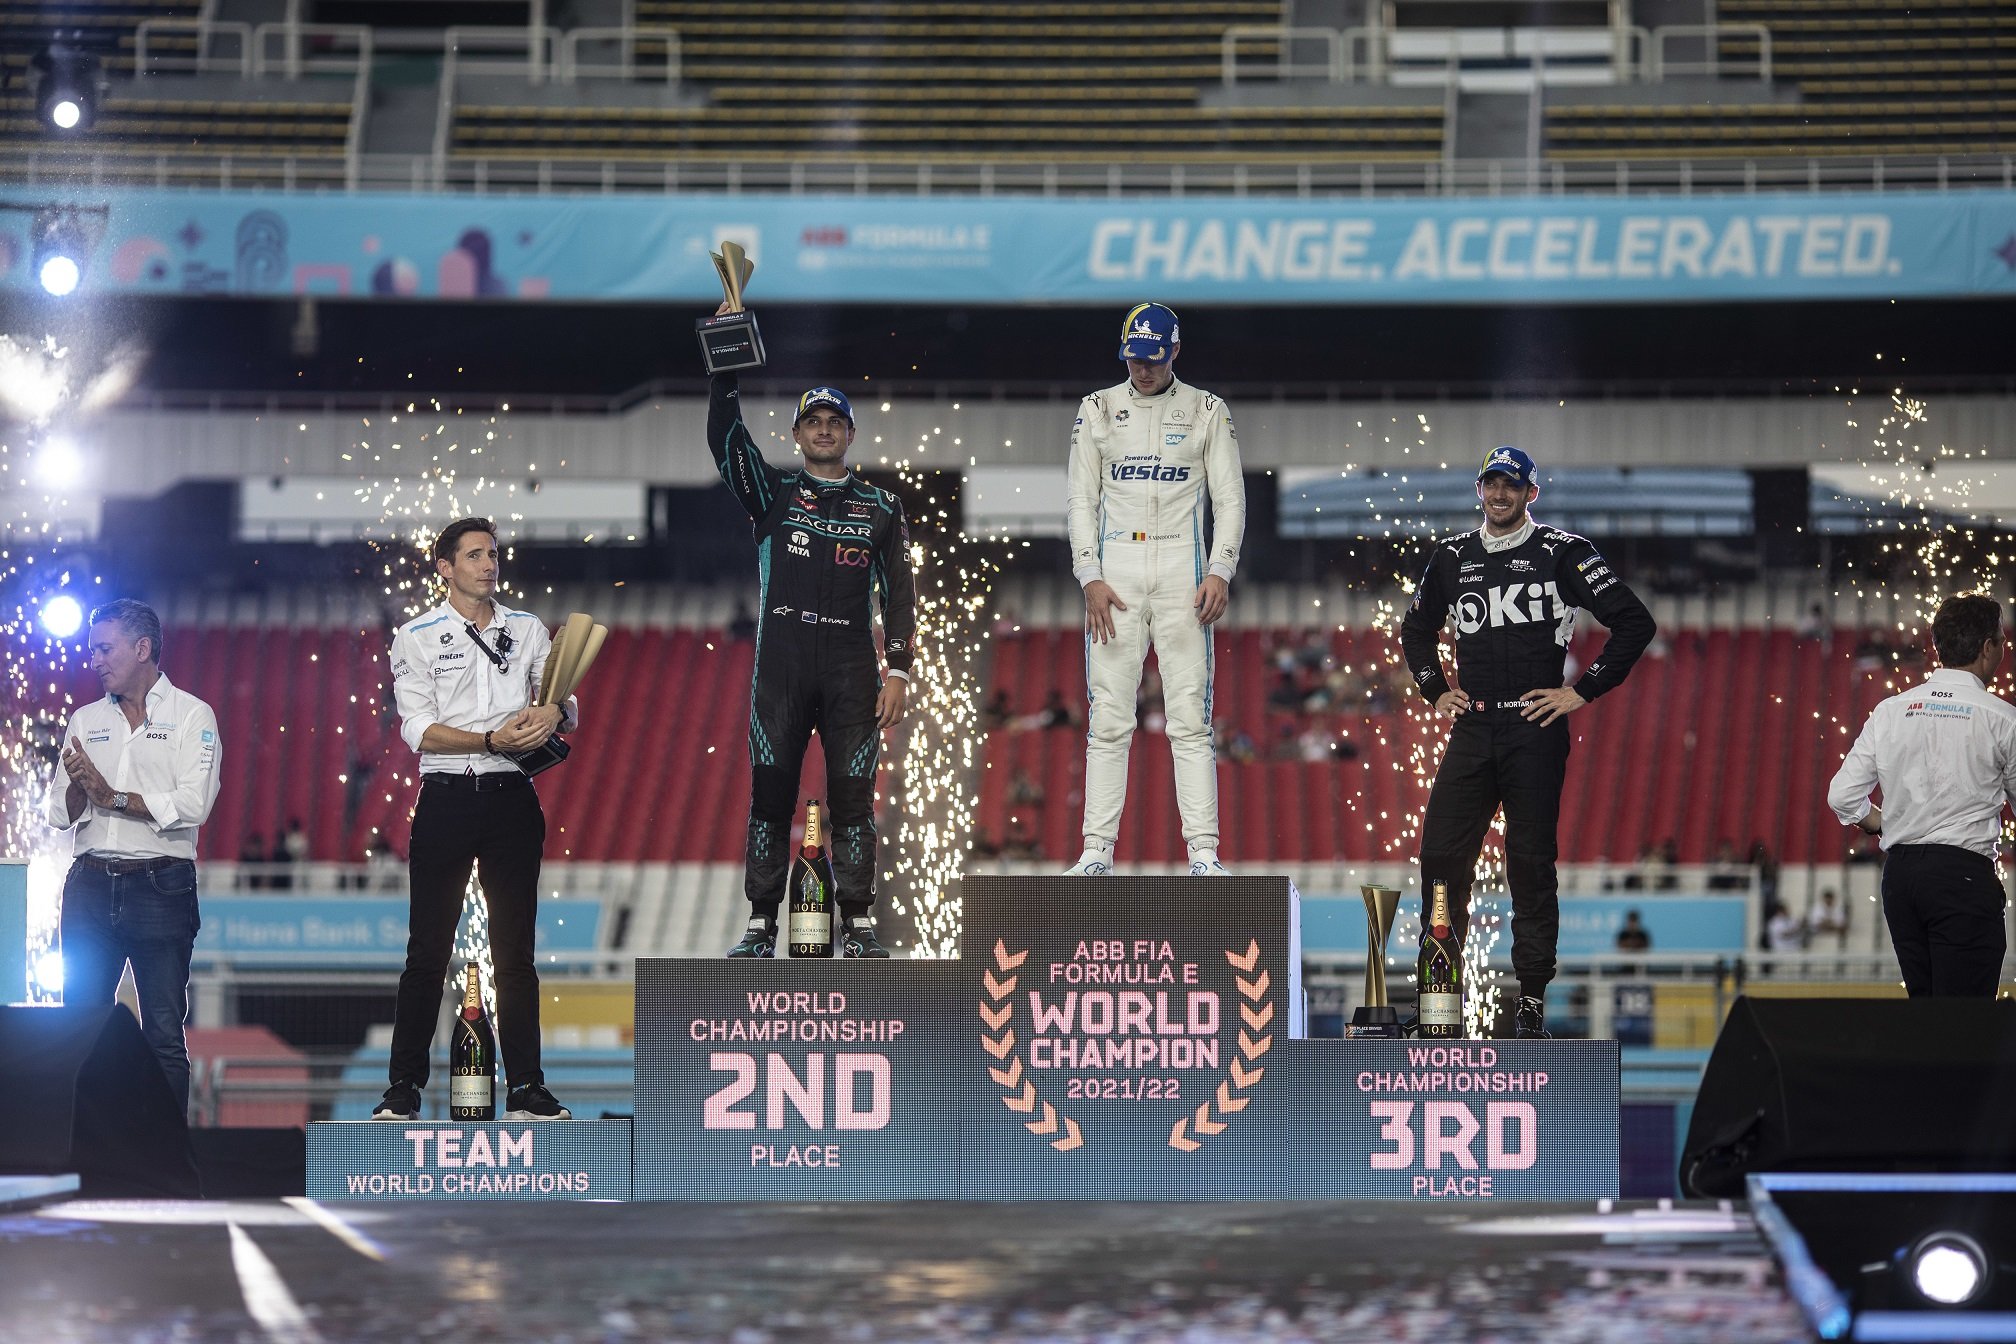 MITCH EVANS FINISHES RUNNER-UP FOR JAGUAR TCS RACING IN 2022 ABB FIA FORMULA E WORLD CHAMPIONSHIP